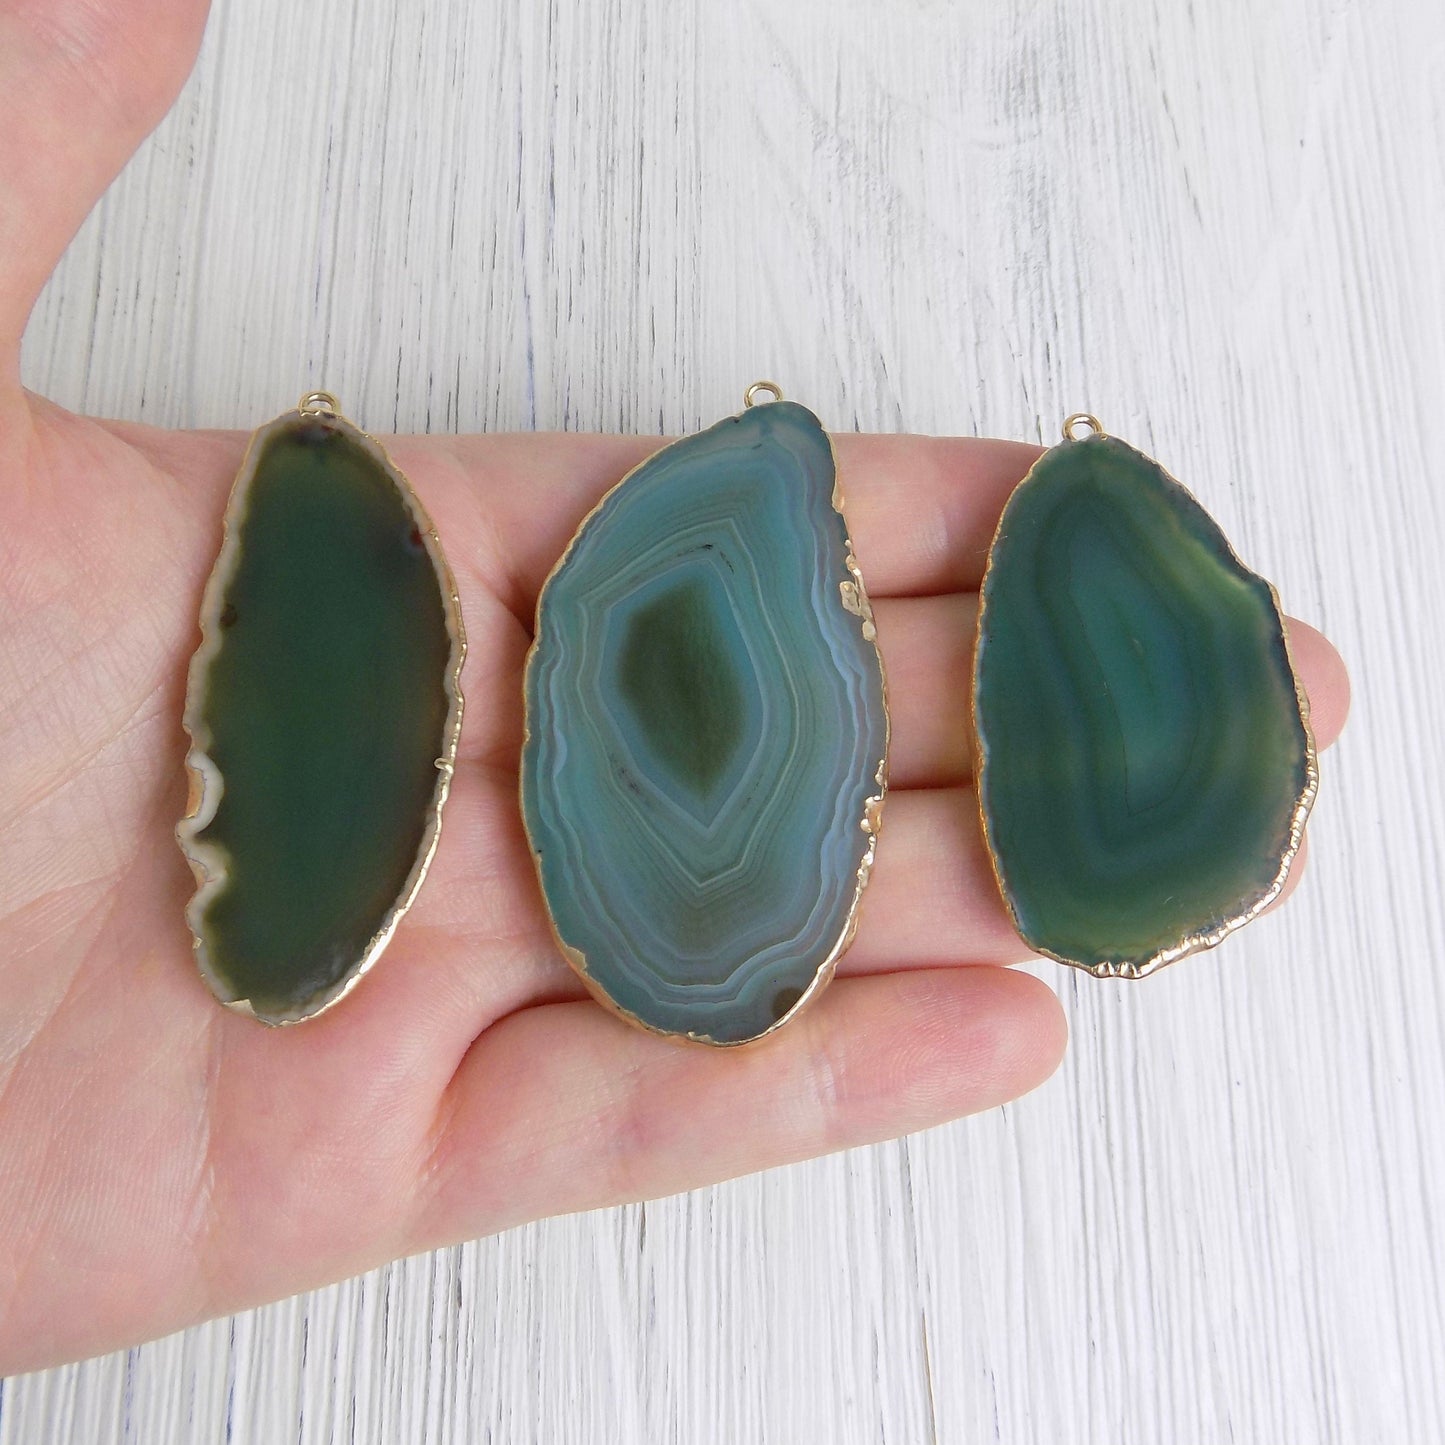 Boho Green Agate Necklace Gold, Geode Pendant Necklace, Statement Jewelry, Gift For Mom, G11-122